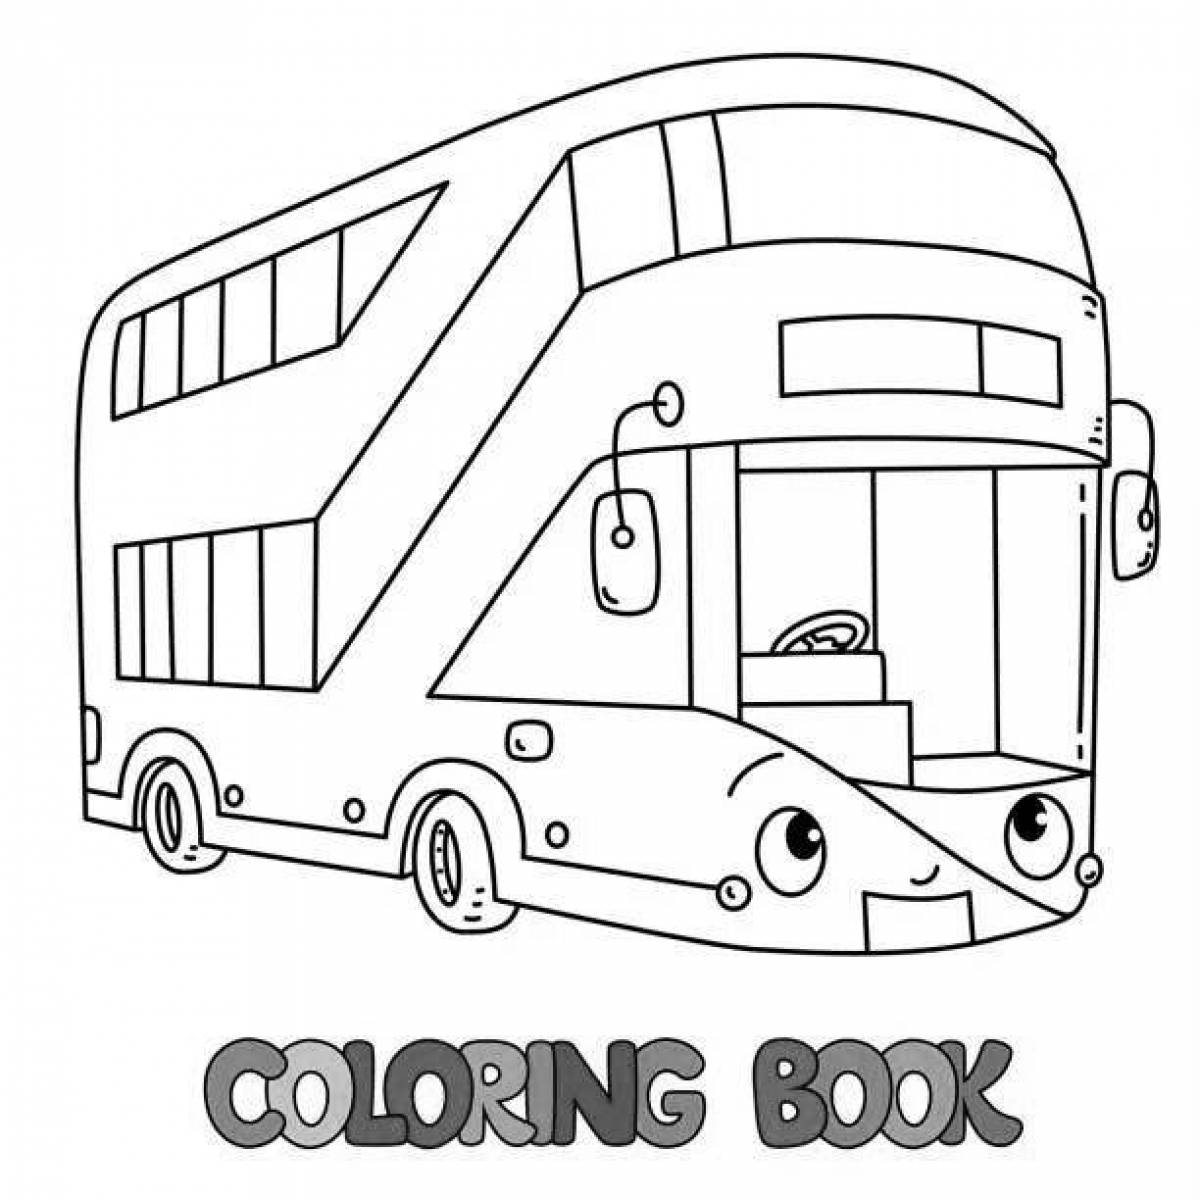 Funny two-story coloring book